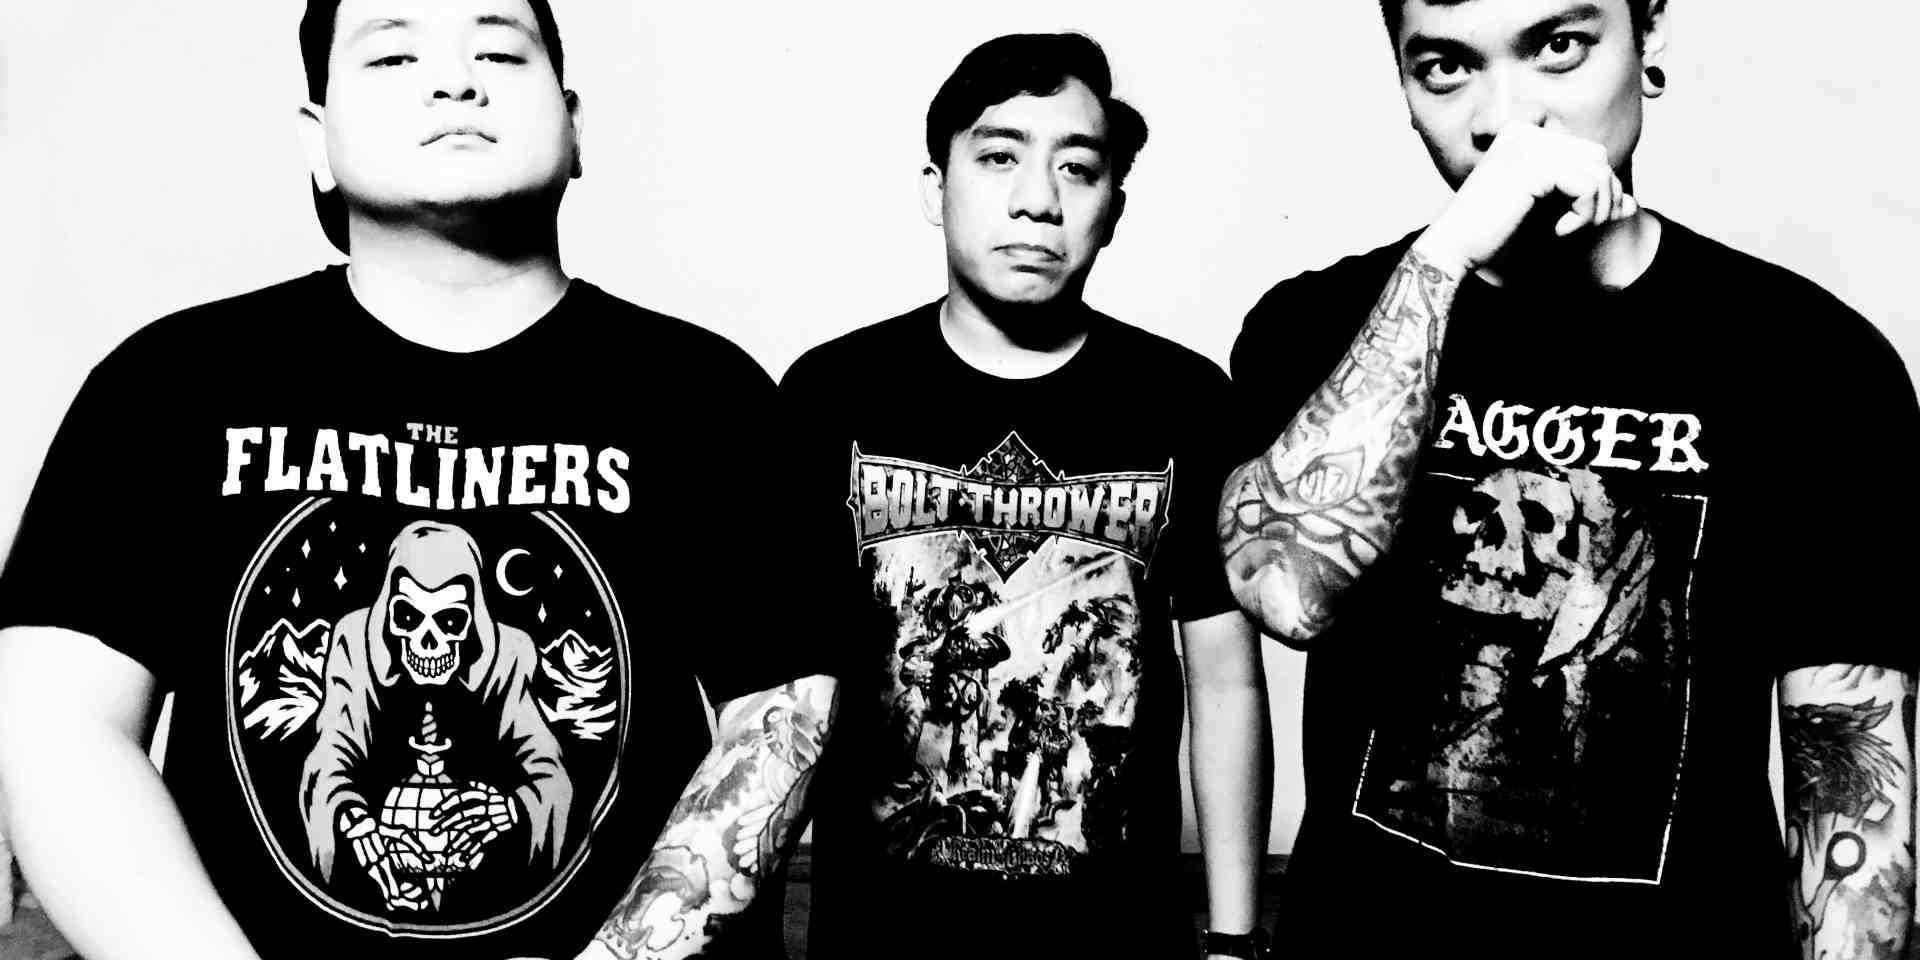 "We've never done this before even though we've been playing music for over 10 years": An interview with Nicholas Wong of Blood Pact